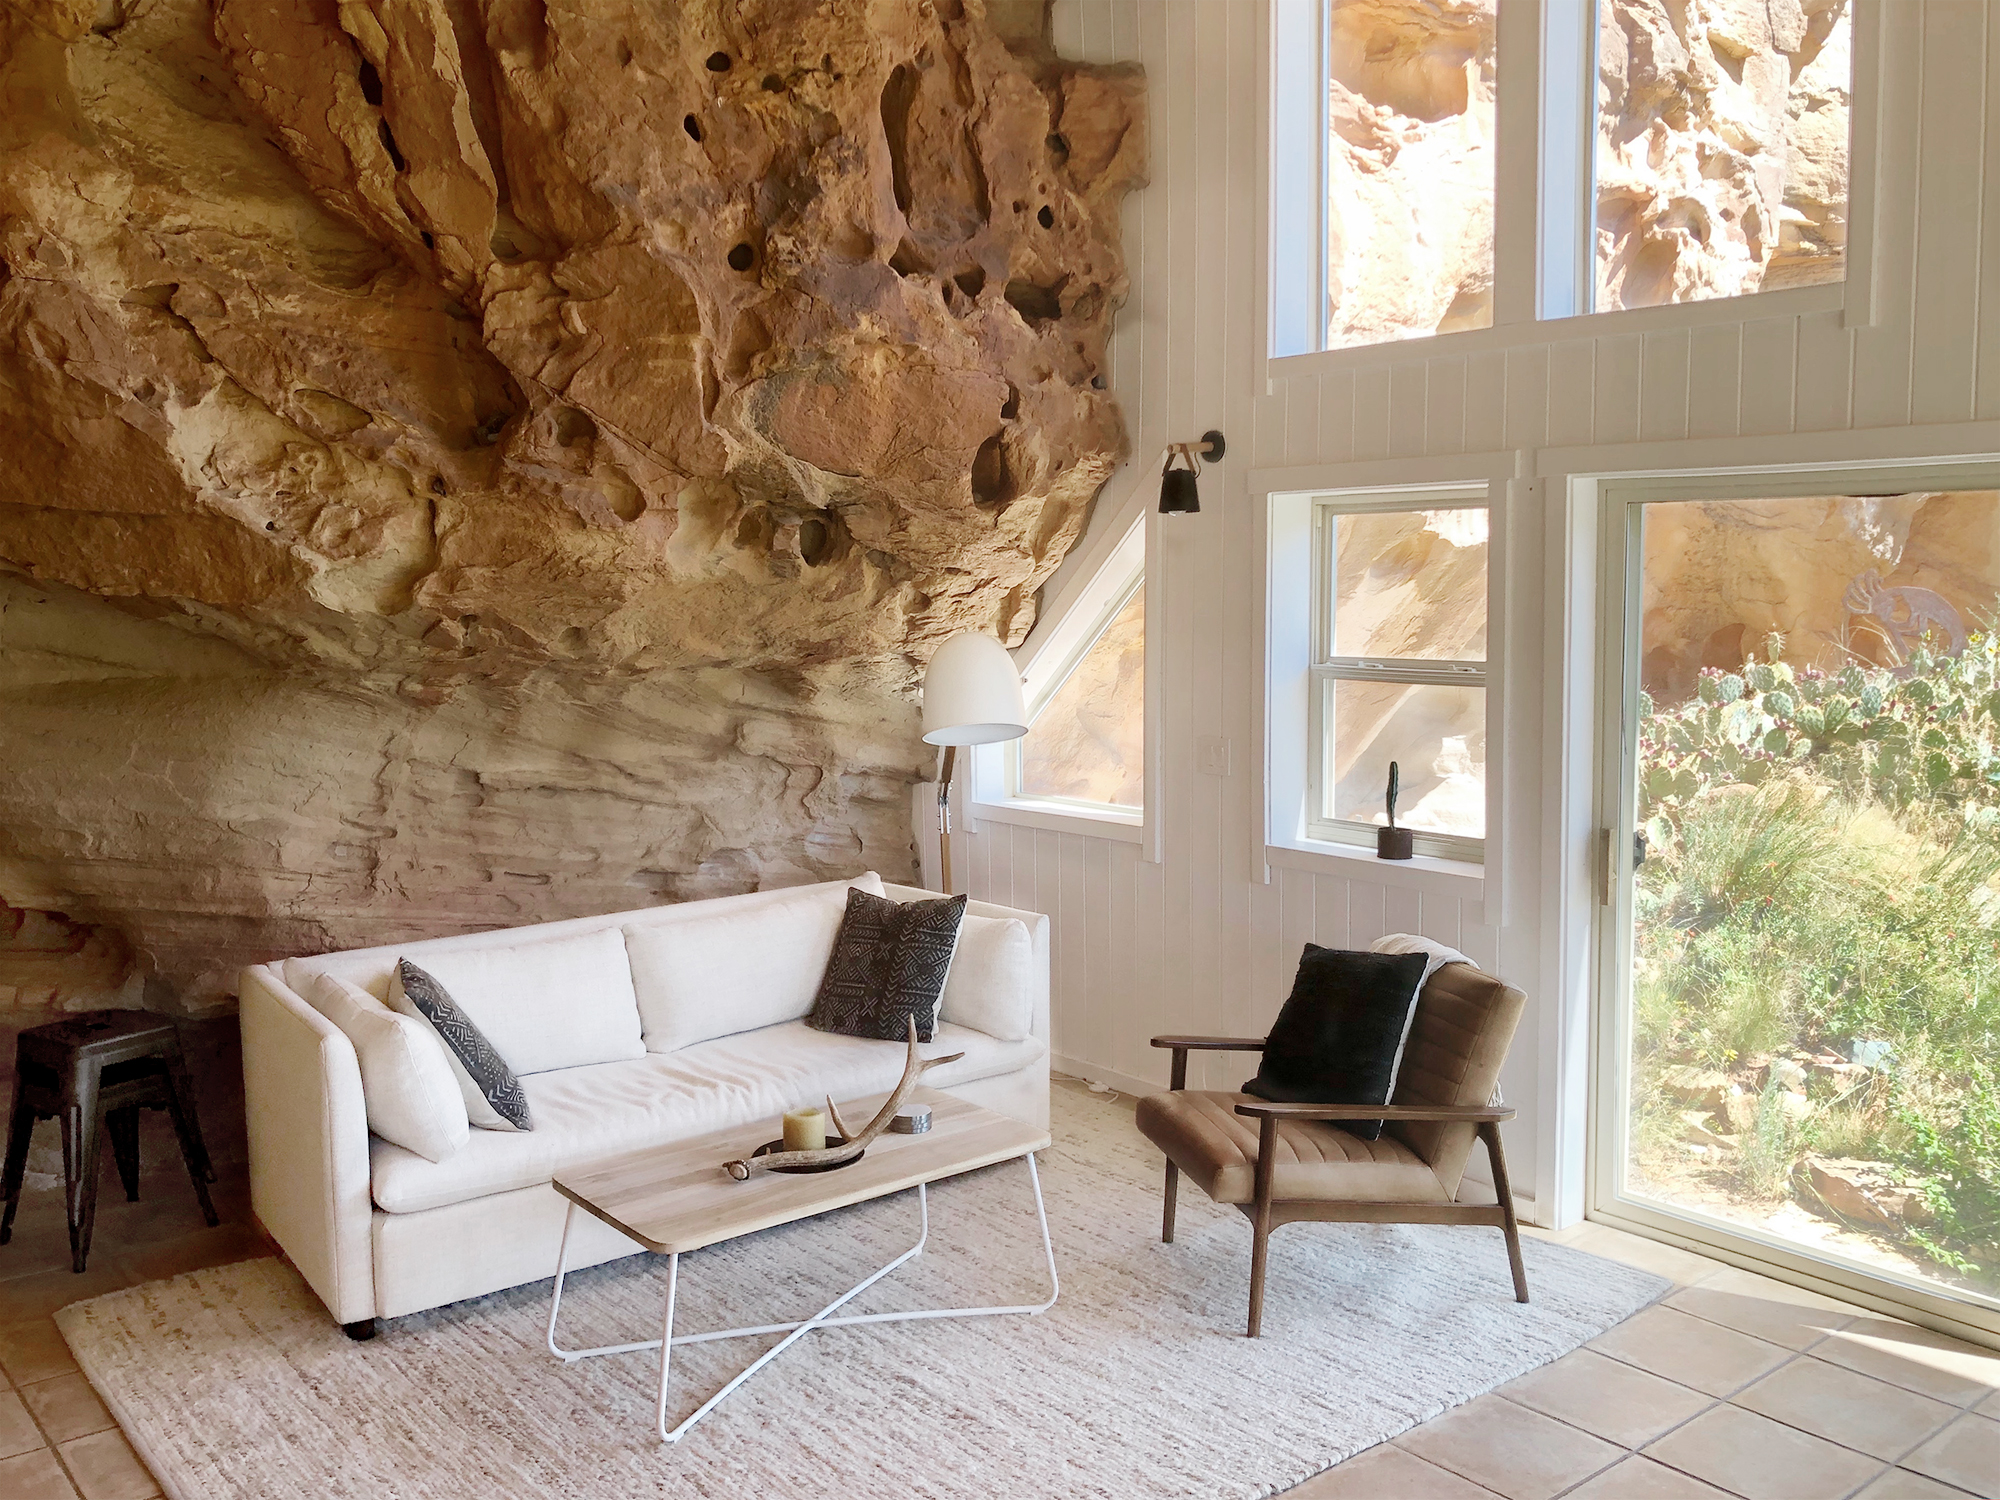 Interior of Private Sage Canyon Cliff House near Mesa Verde